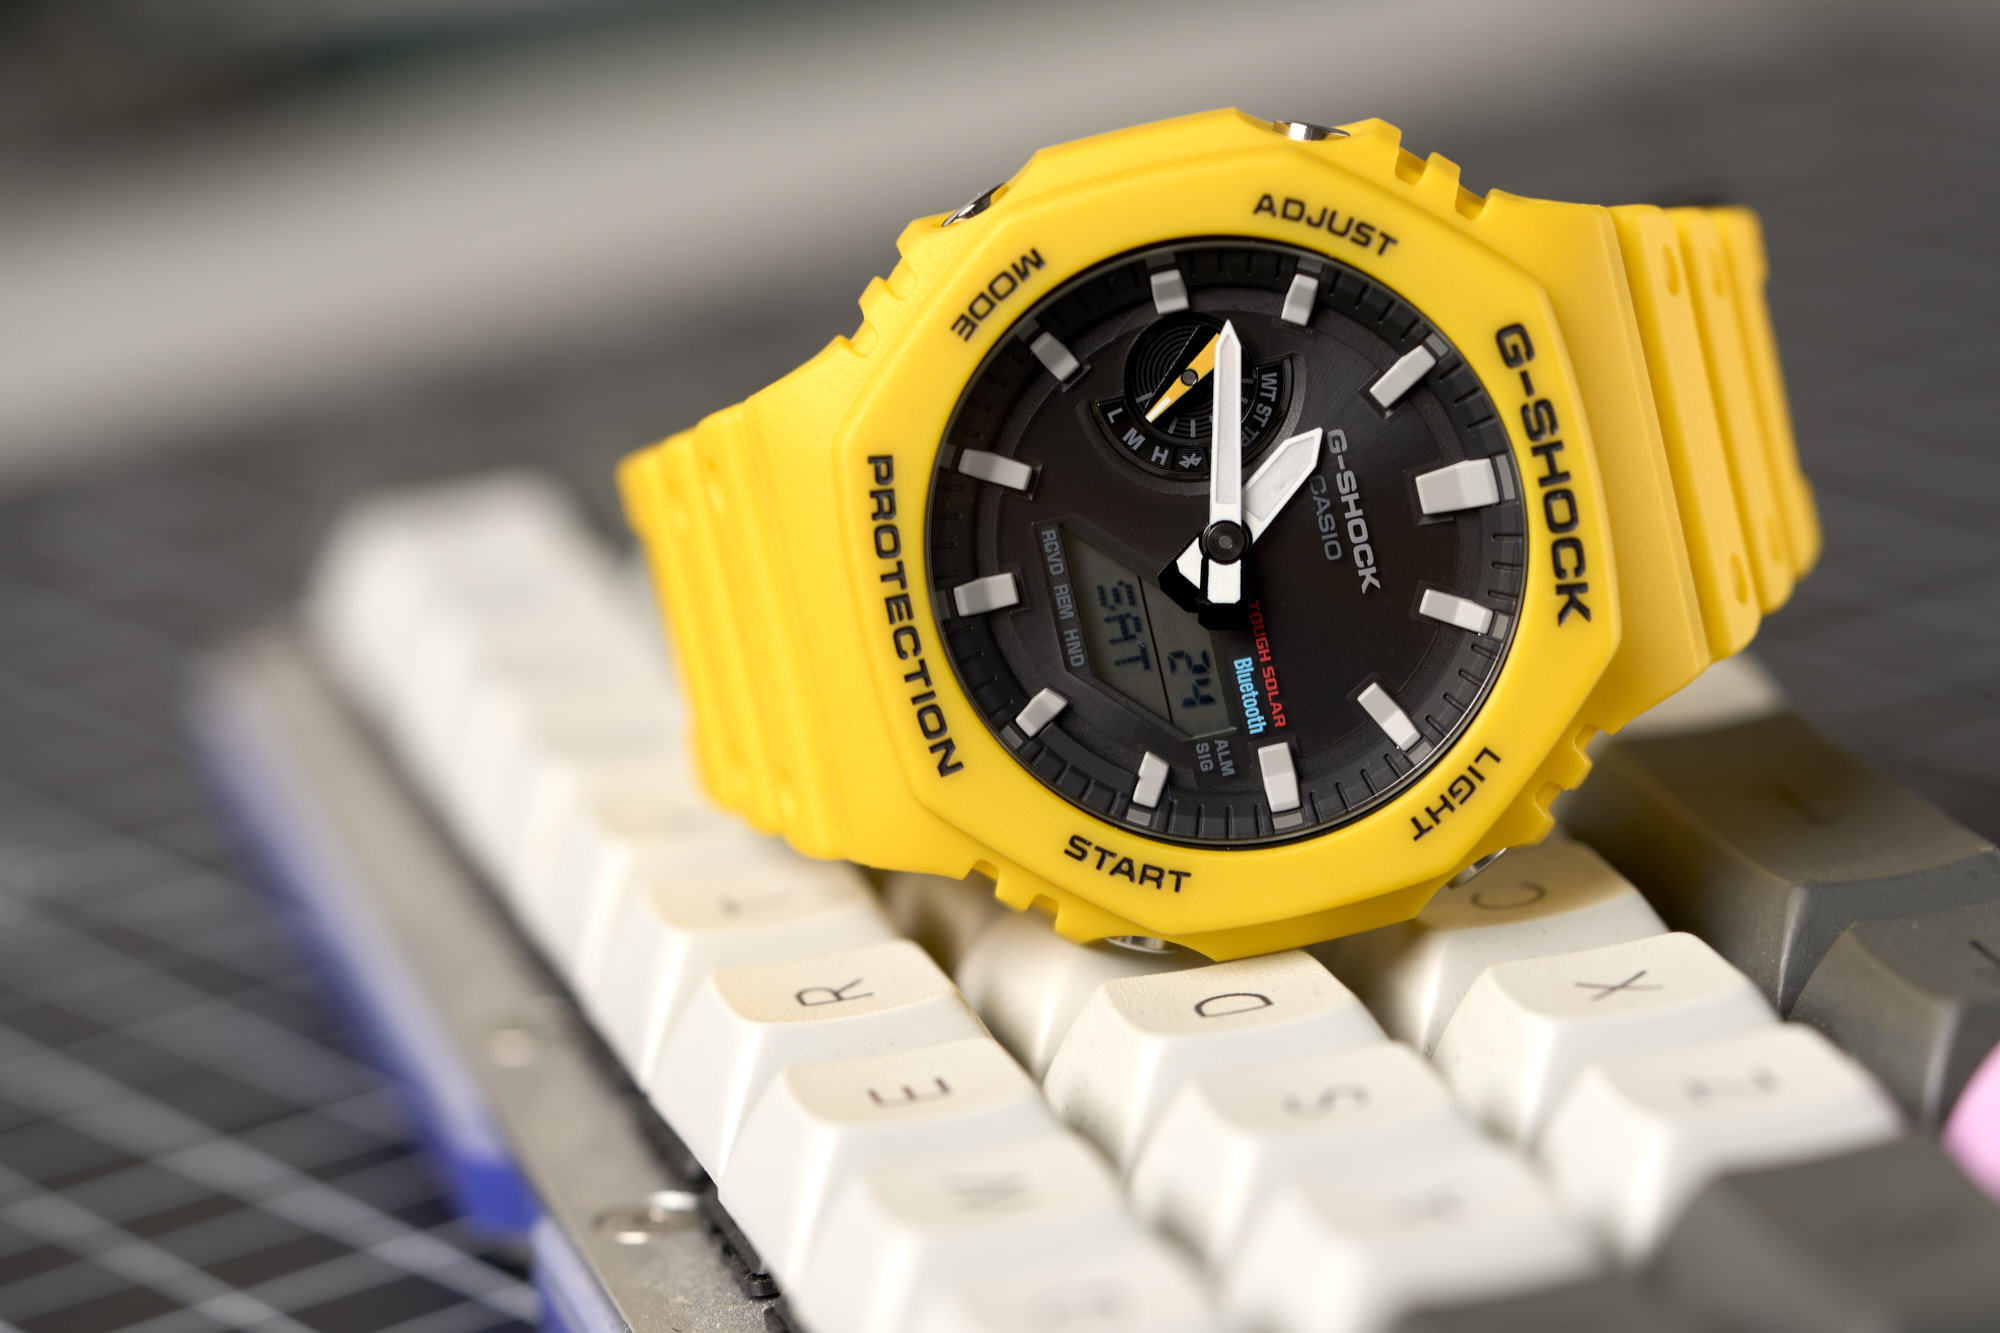 G-SHOCK GAB2100 Watch - Adventure-Ready, Unmatched Toughness